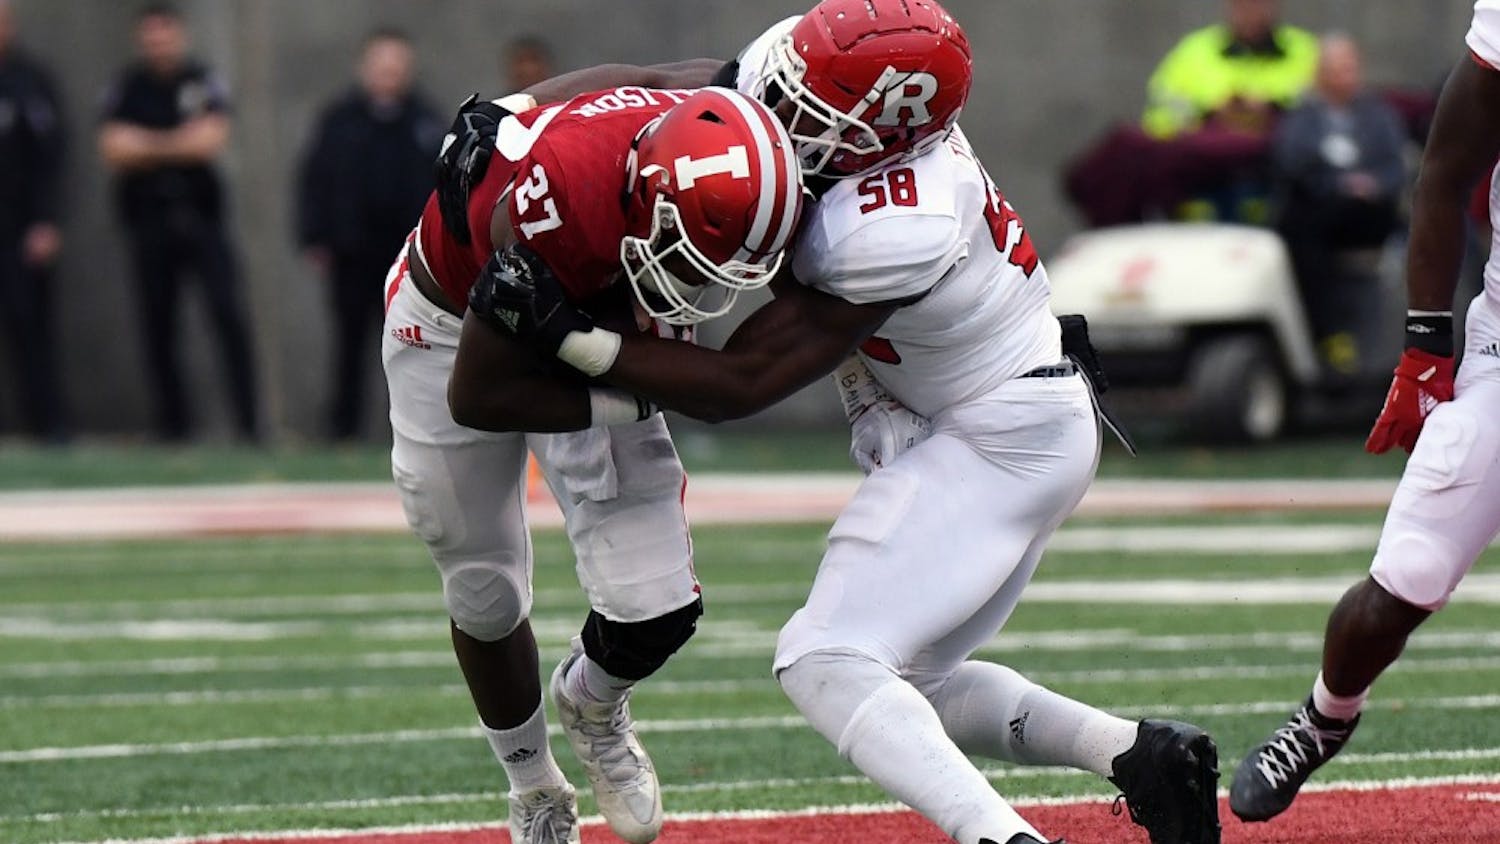 Then-freshman, now sophomore running back Morgan Ellison runs the ball in the first half against Rutgers on Nov. 18, 2017, at Memorial Stadium. IU Athletics announced Friday night Ellison has been suspended from IU for 2.5 years and is permanently dismissed from the IU football team.